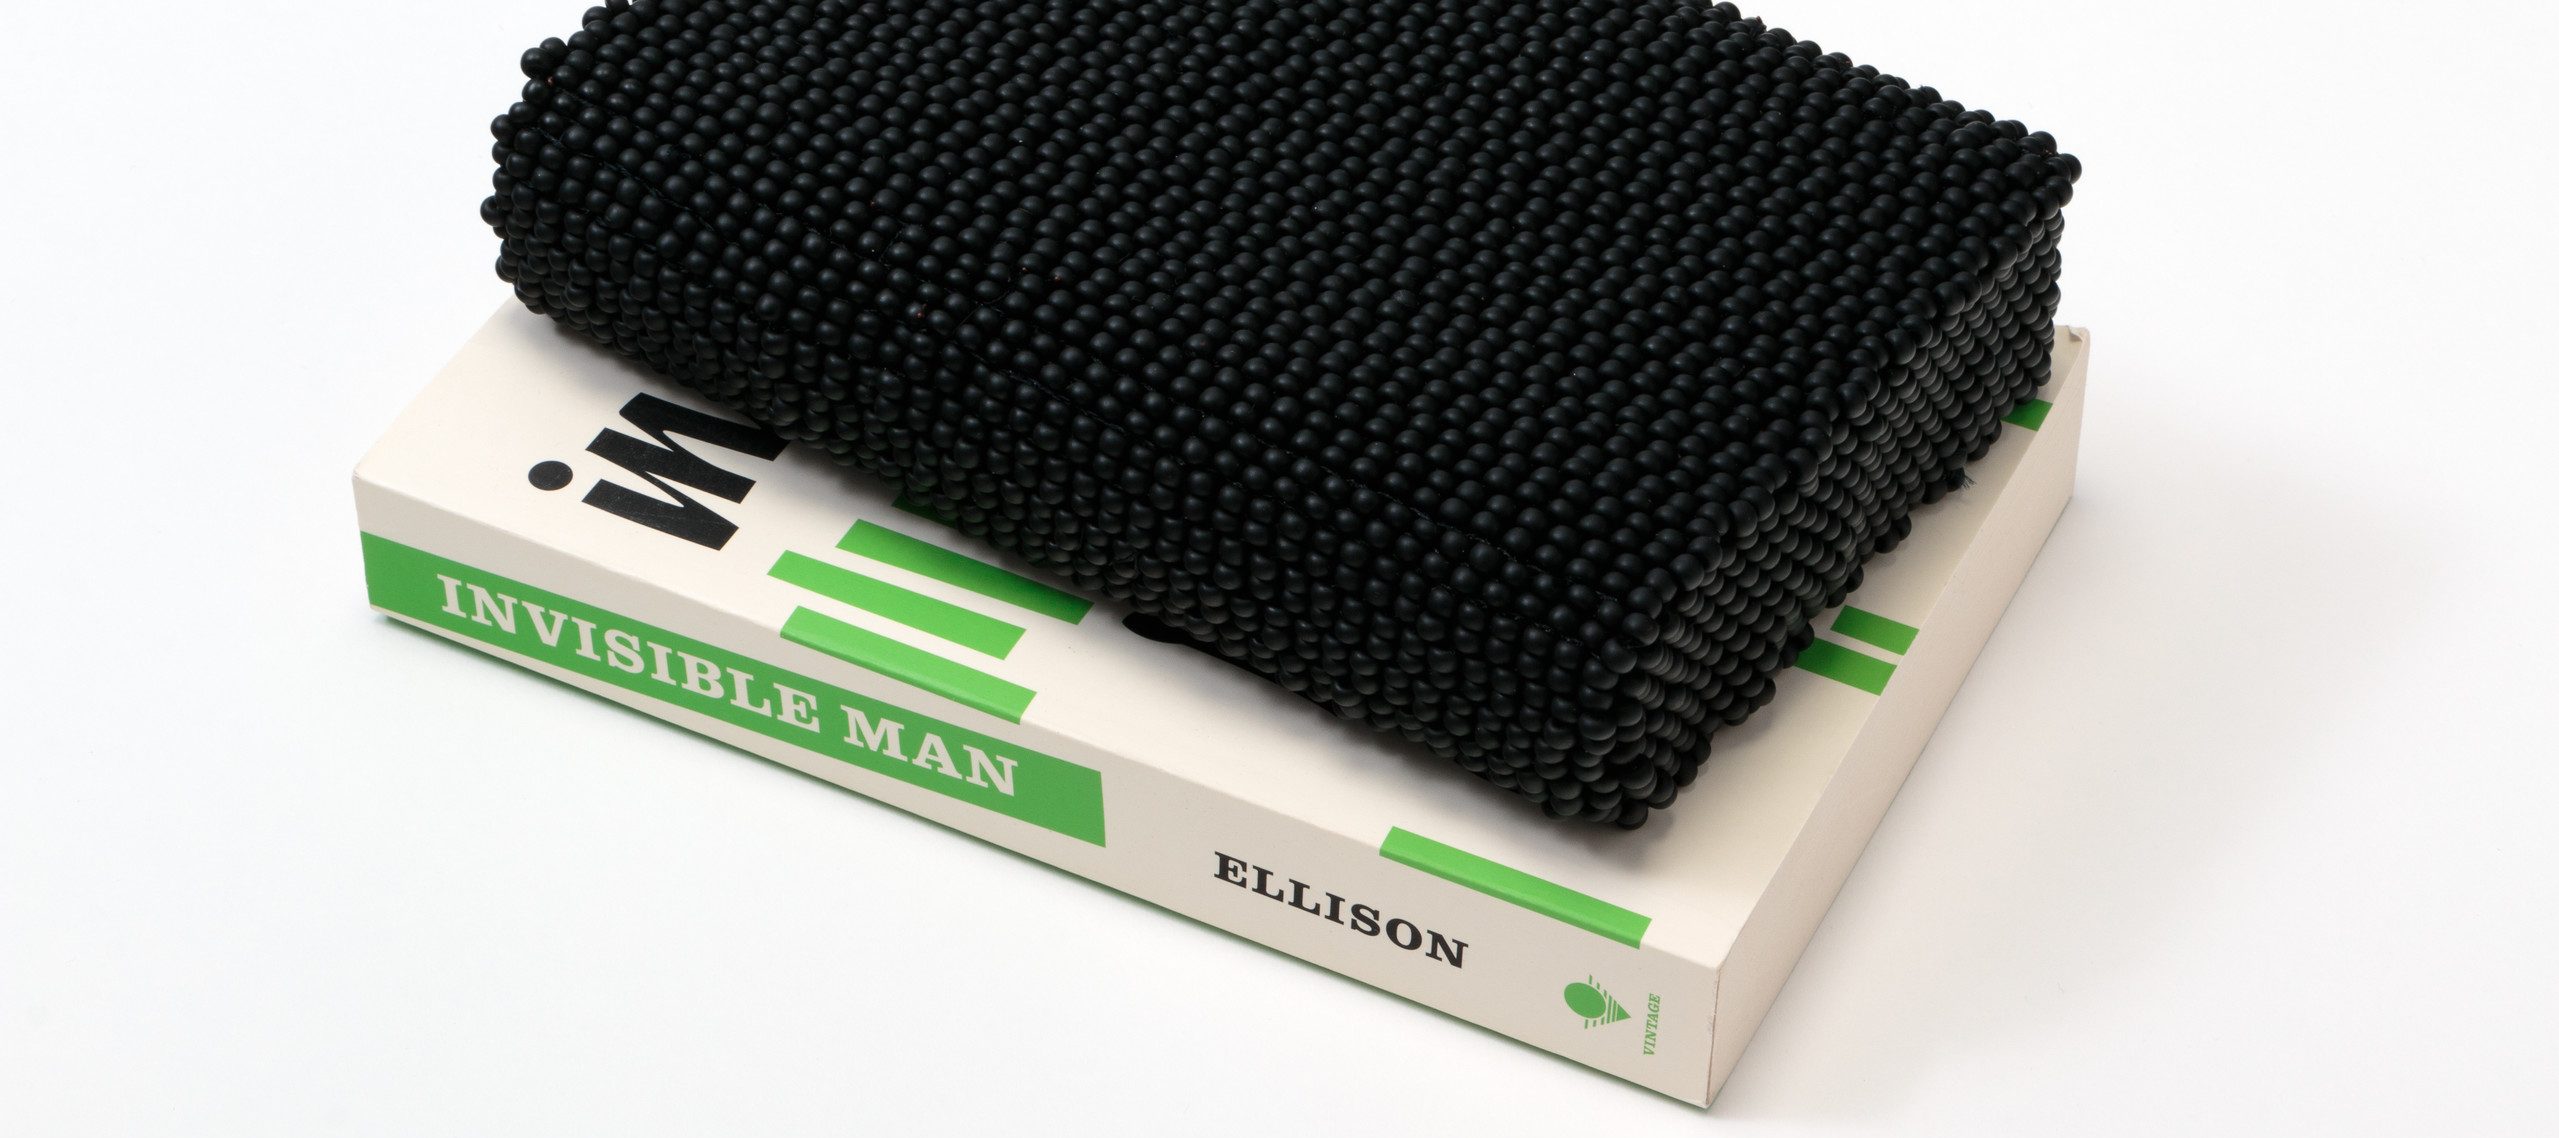 A paperback copy of Ralph Ellison's novel 'Invisible Man' sits on a white surface. The book features black text and short, green, vertical lines on a white background. Atop the book is a book-like shape comprising black beads.